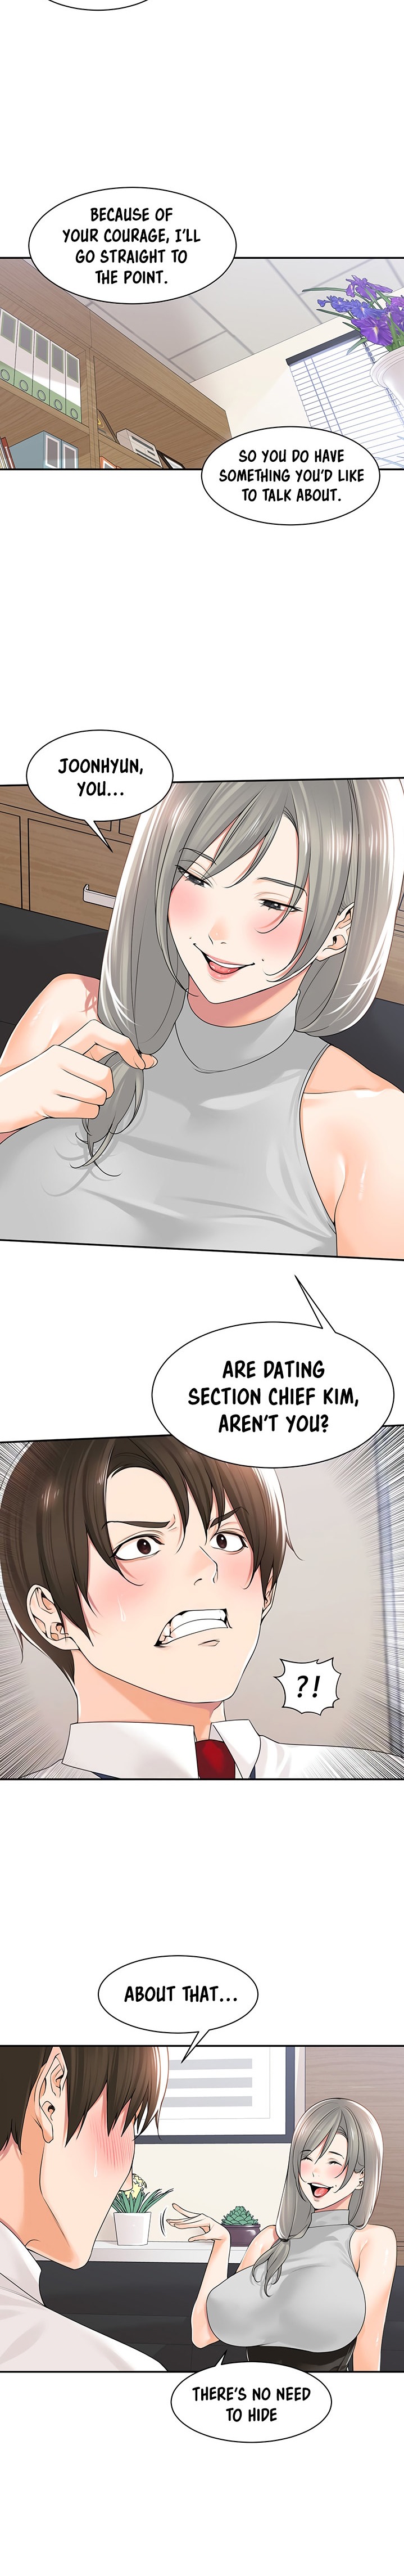 Manager, Please Scold Me - Chapter 12 Page 5